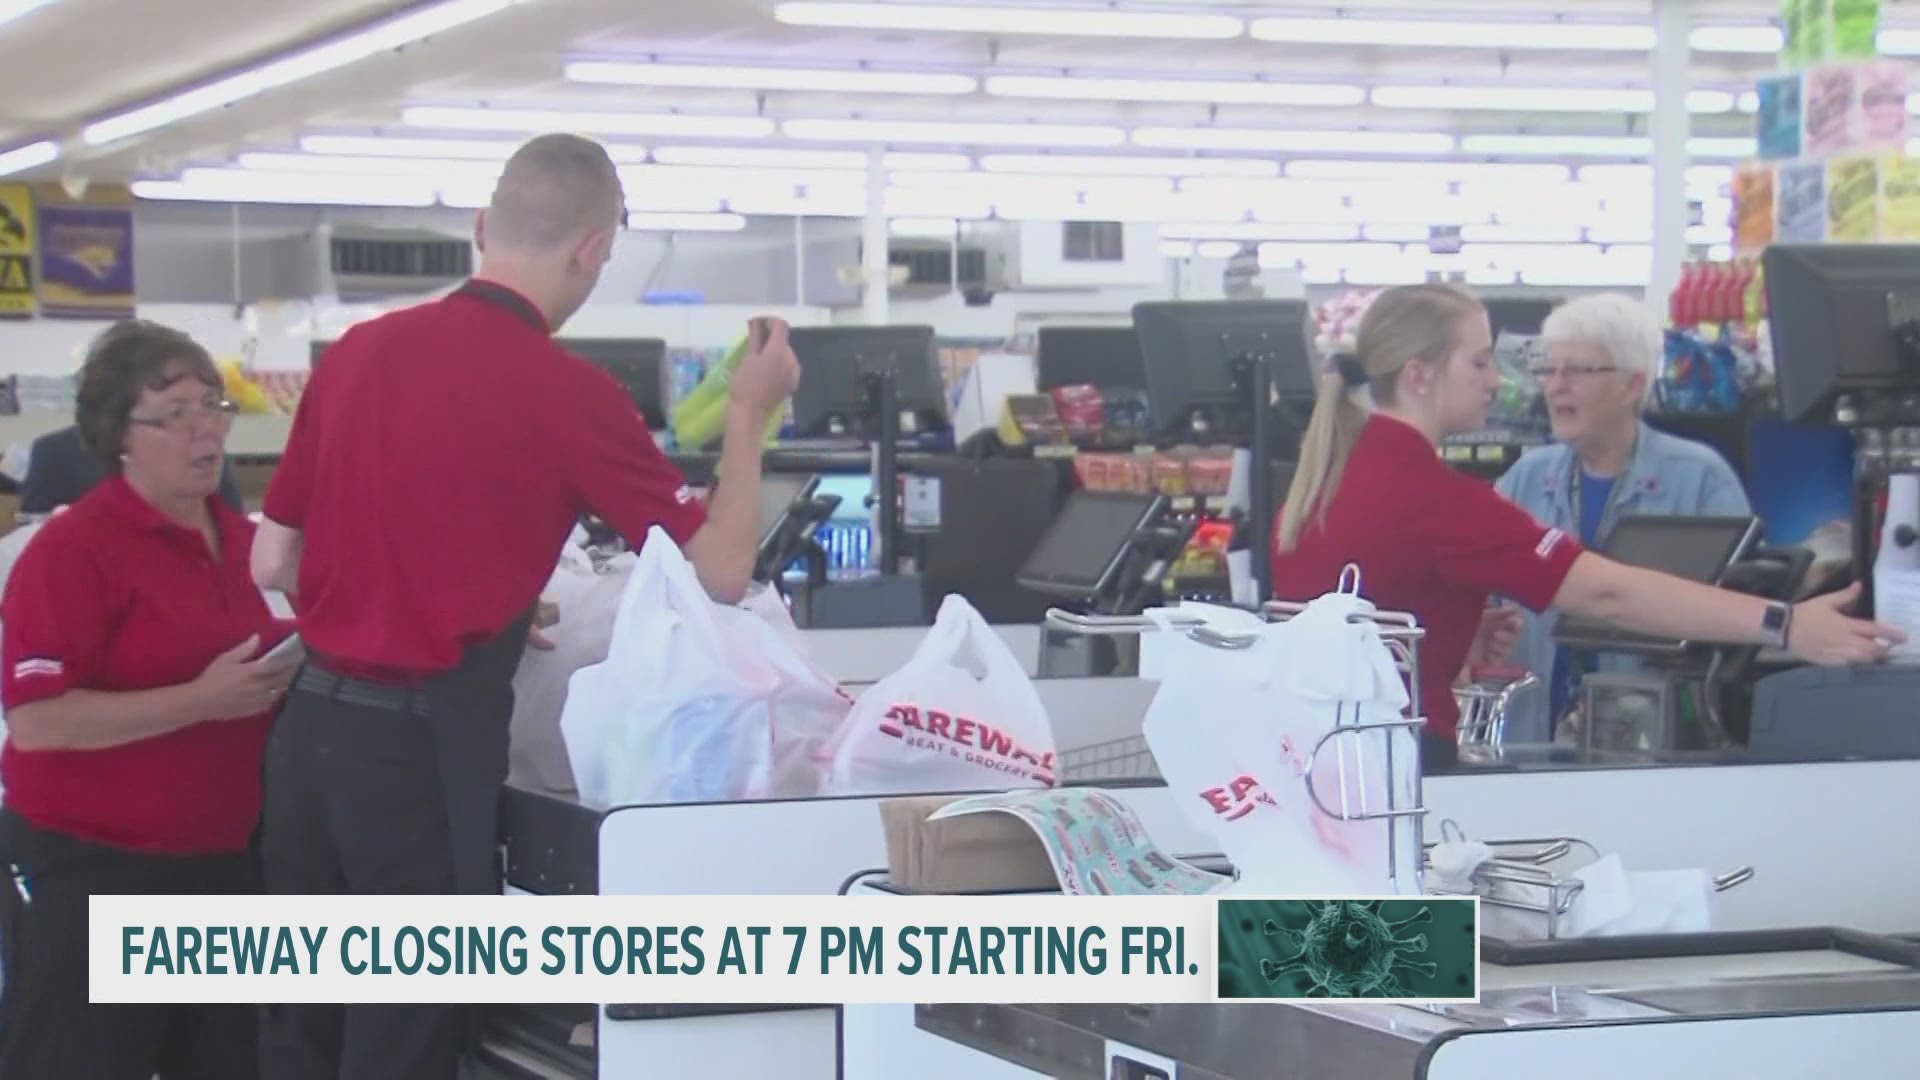 Fareway stores will close at 7 p.m. starting Friday giving employees more time to clean the stores.